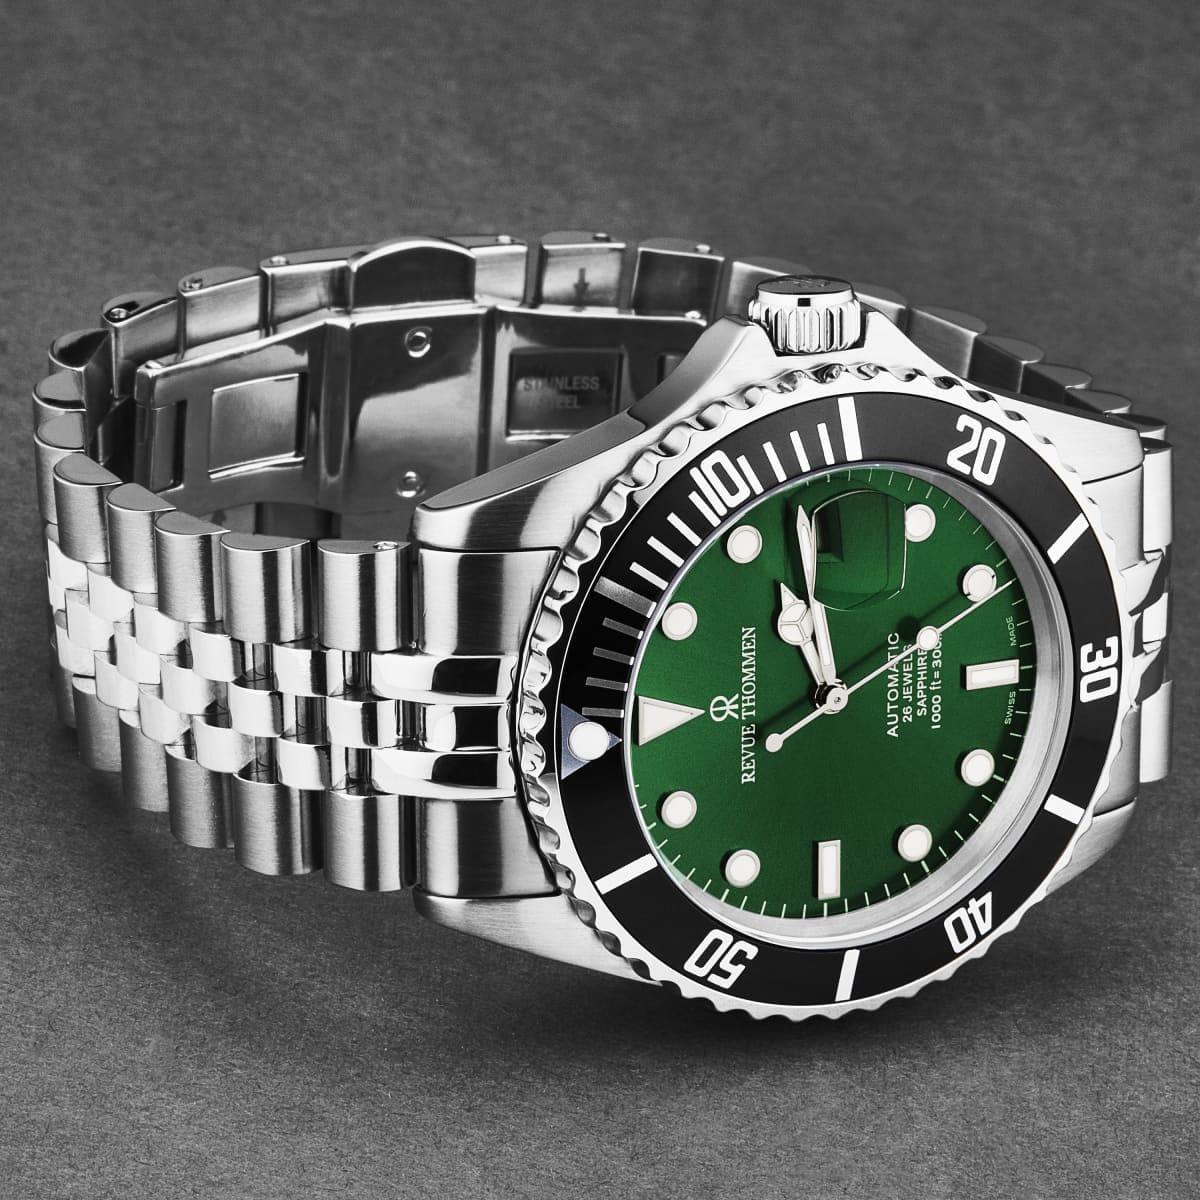 Revue Thommen Men’s ’Diver’ Green Dial Stainless Steel Bracelet Automatic Watch 17571.2222 - On sale